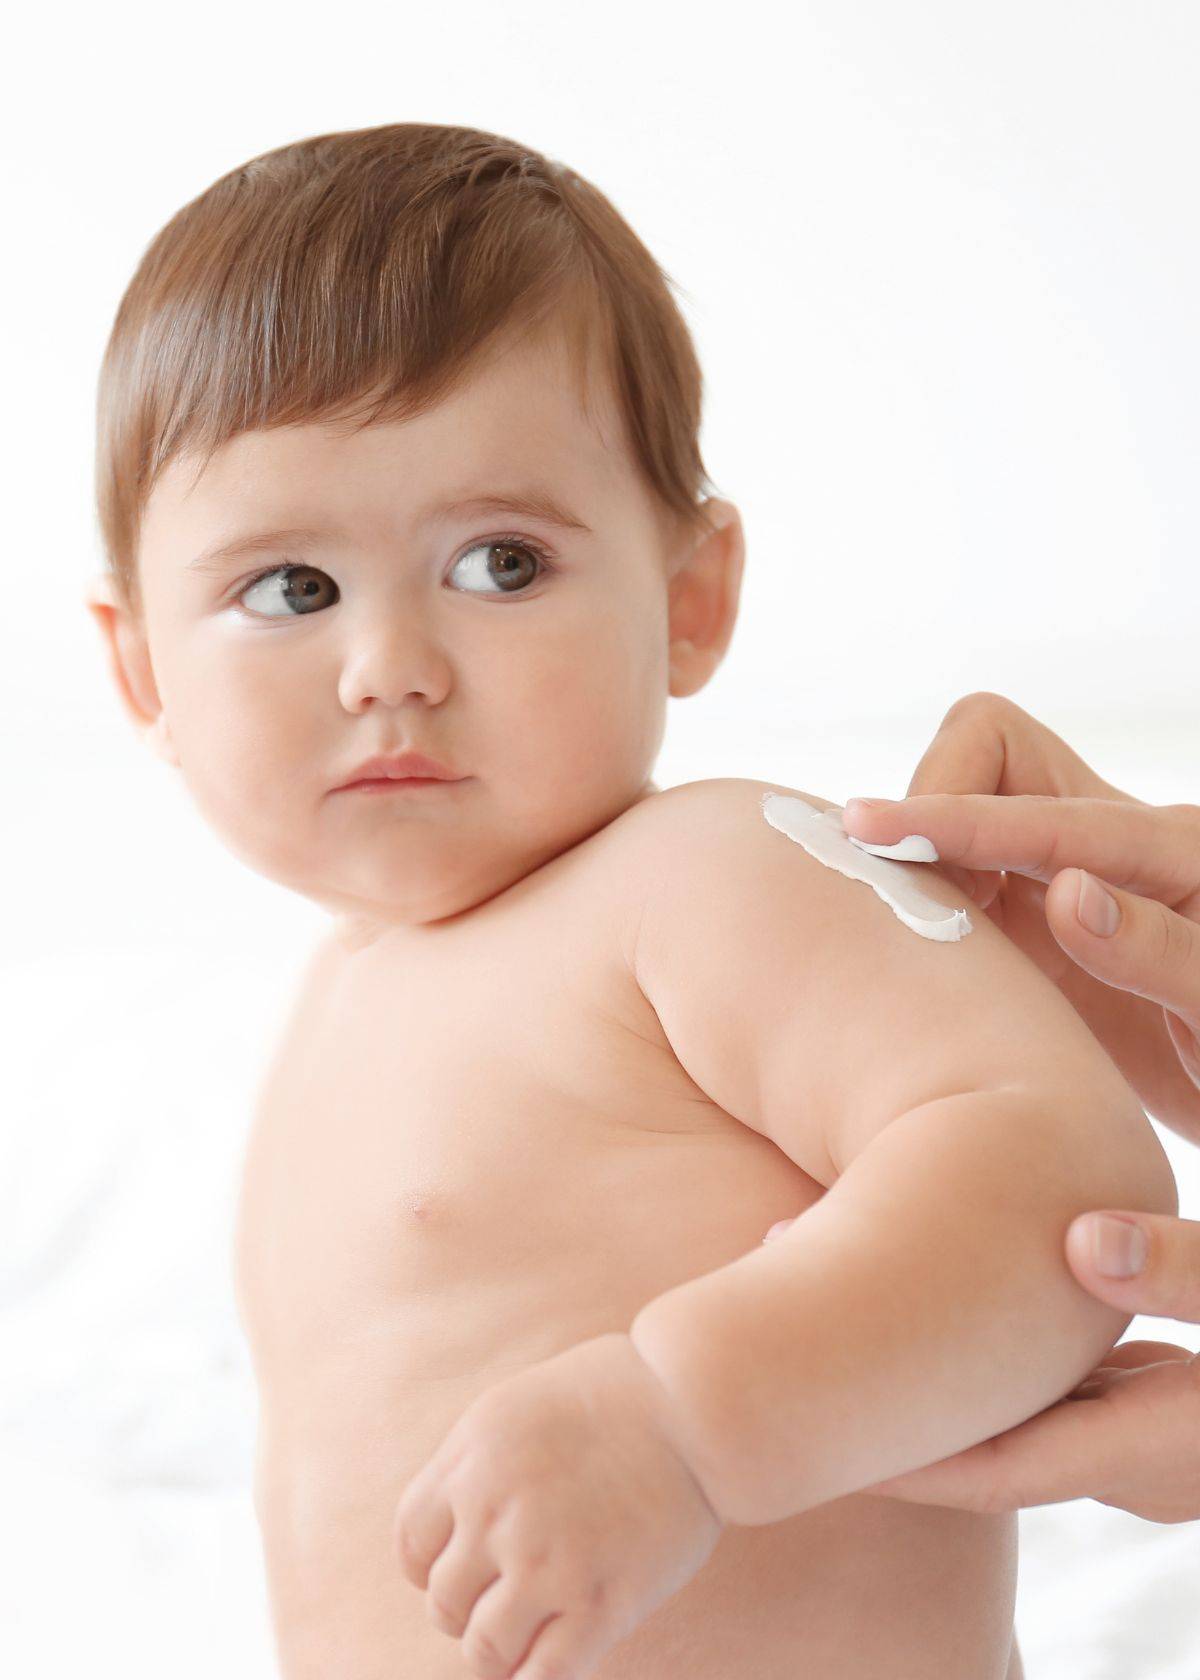 Baby Lotion for Mosquitoes - Buying Guide